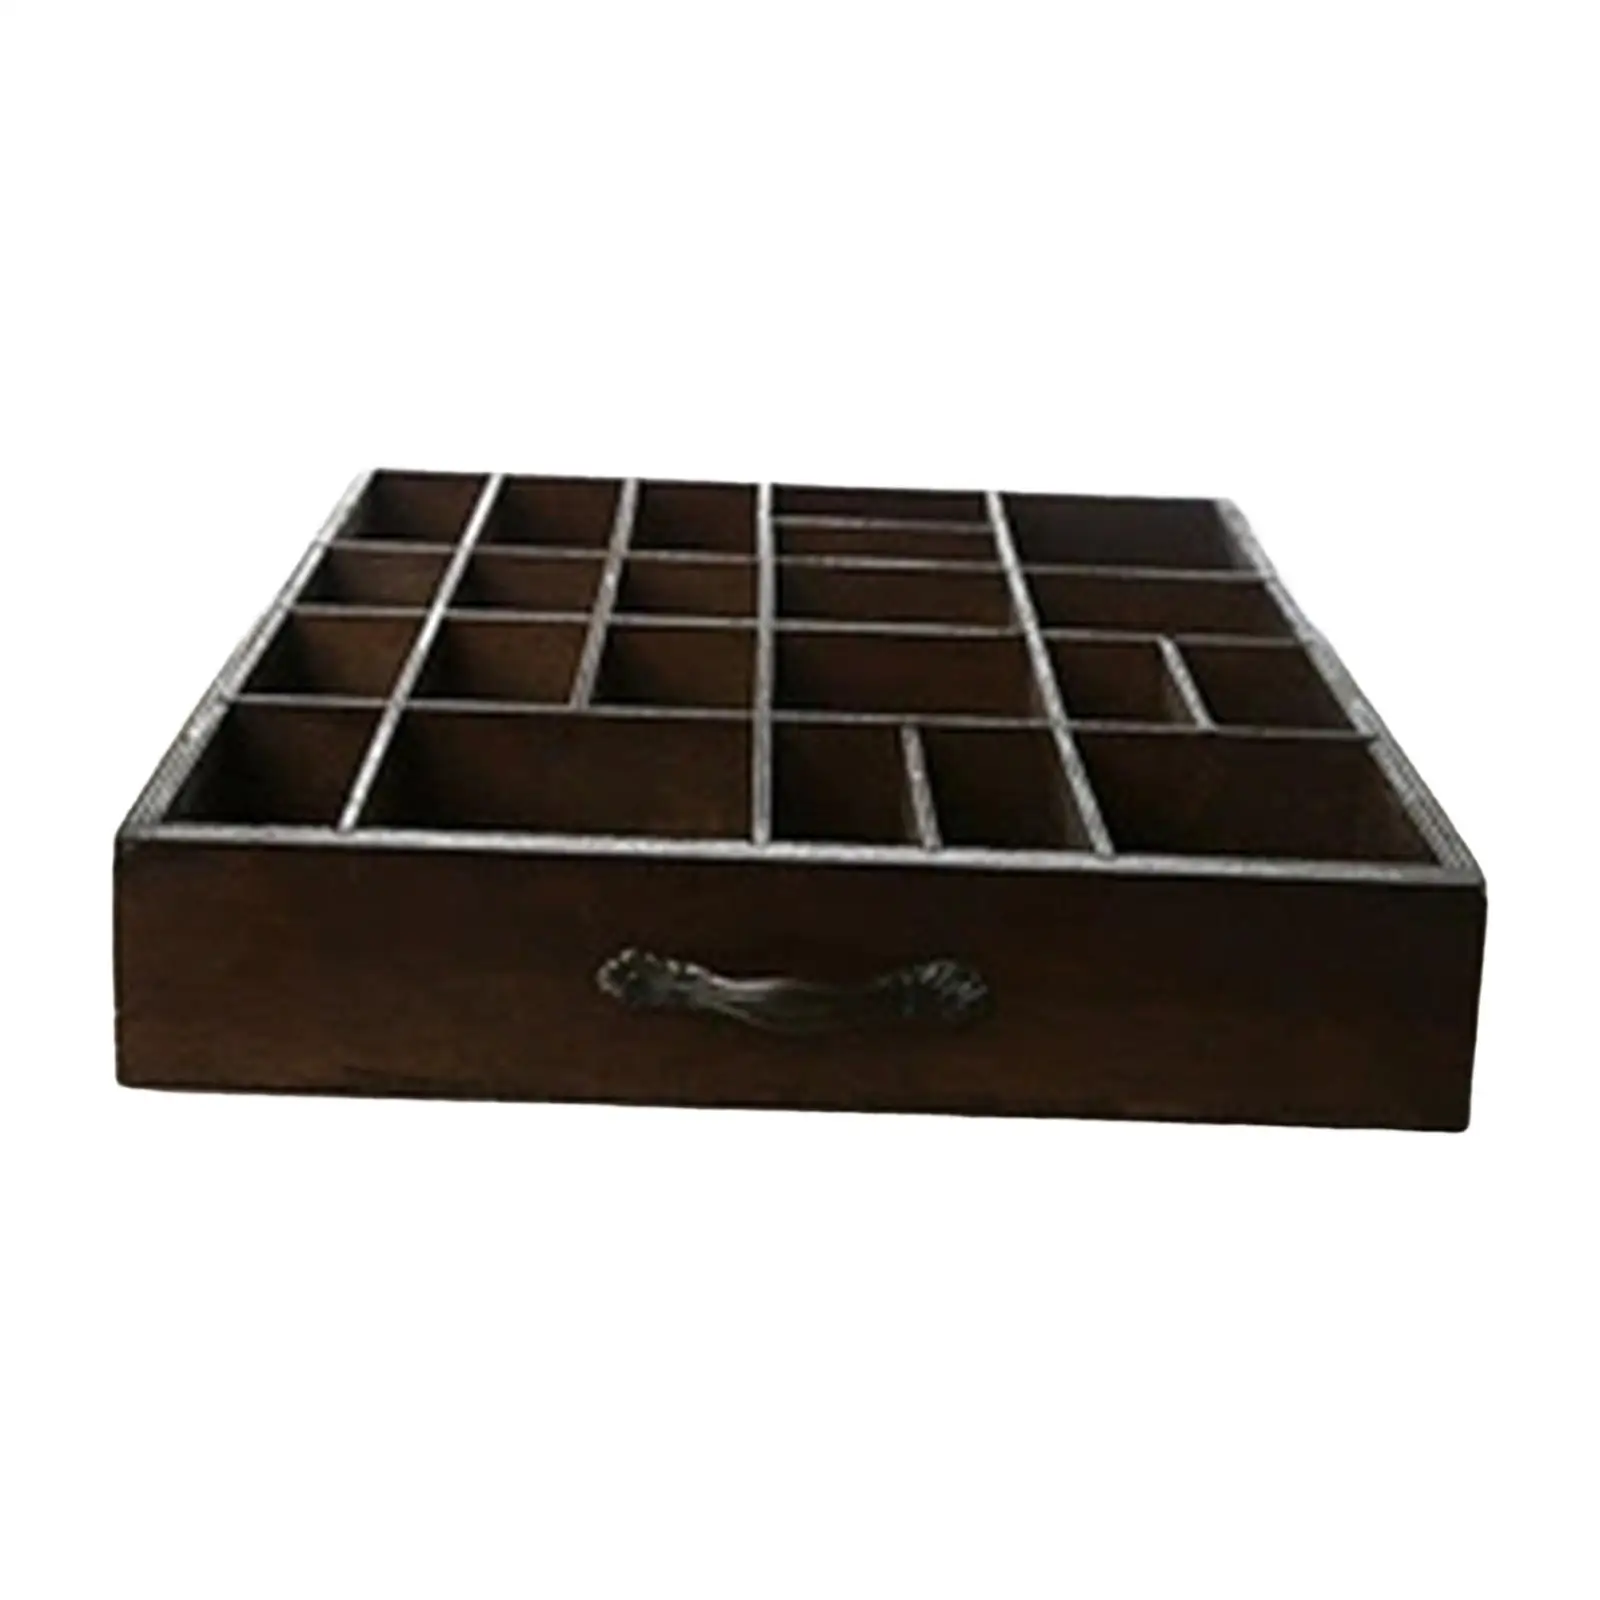 

Wooden Drawer Organizer 22 Compartments 22 Grid Sorting Tray Divided Tray for Sundry Kitchen Countertop Bathroom Dresser Cabinet